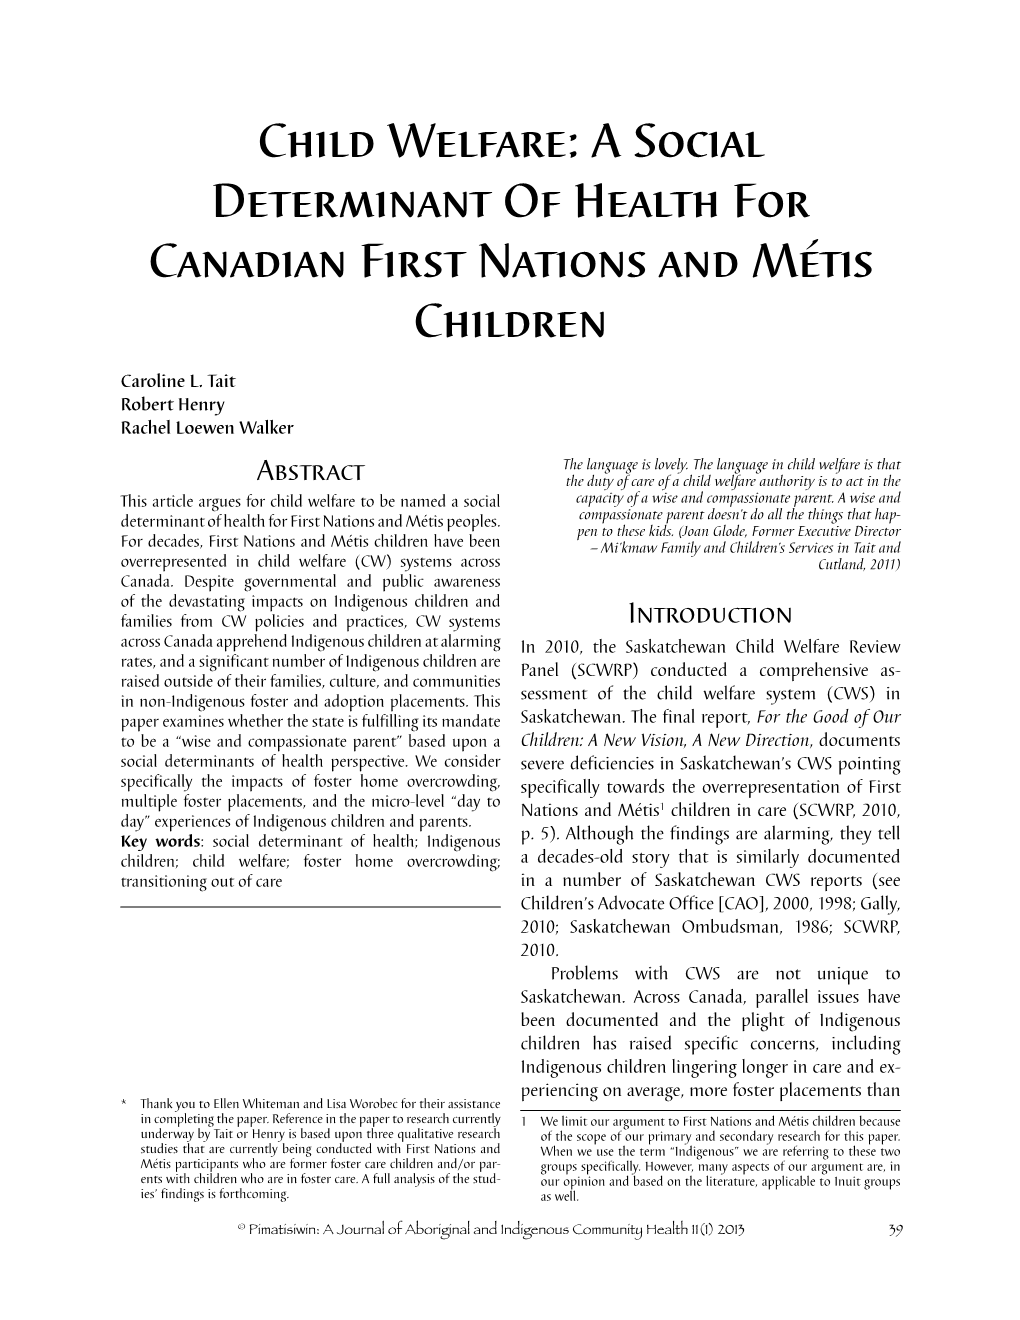 Child Welfare: a Social Determinant of Health for Canadian First Nations and Métis Children